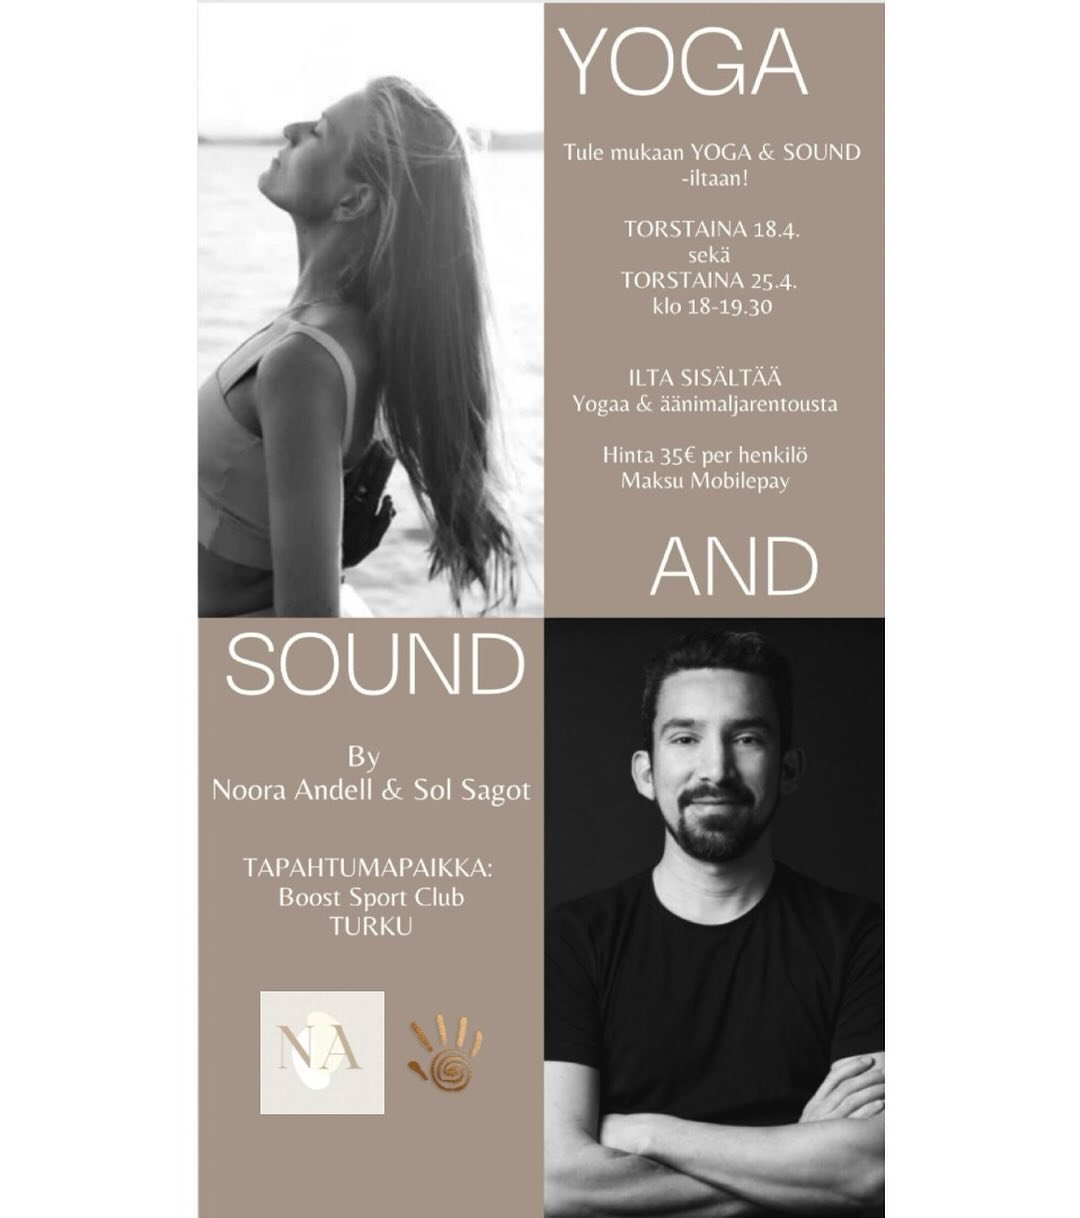 Yoga &amp; Sound coming up next week at @boostsportsclub.fi with @n.a.health 

Very few spots available at this point 

Send me a message if you want to participate 

#soundhealing #yoga #wellnes #turku